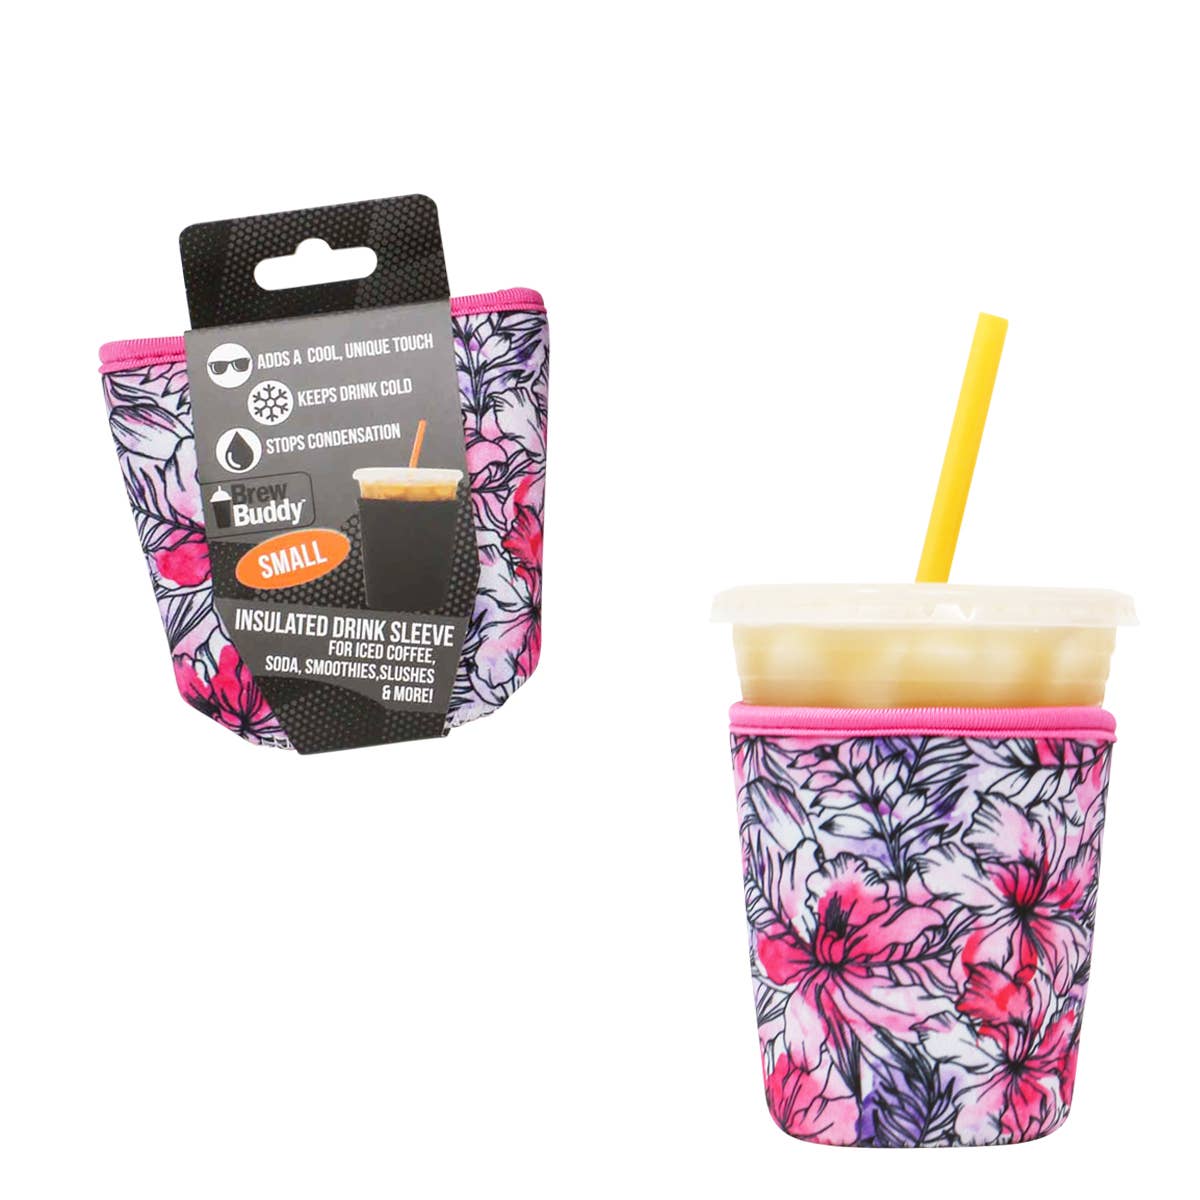 Brew Buddy Insulated Iced Coffee Sleeve - Hibiscus (Small)